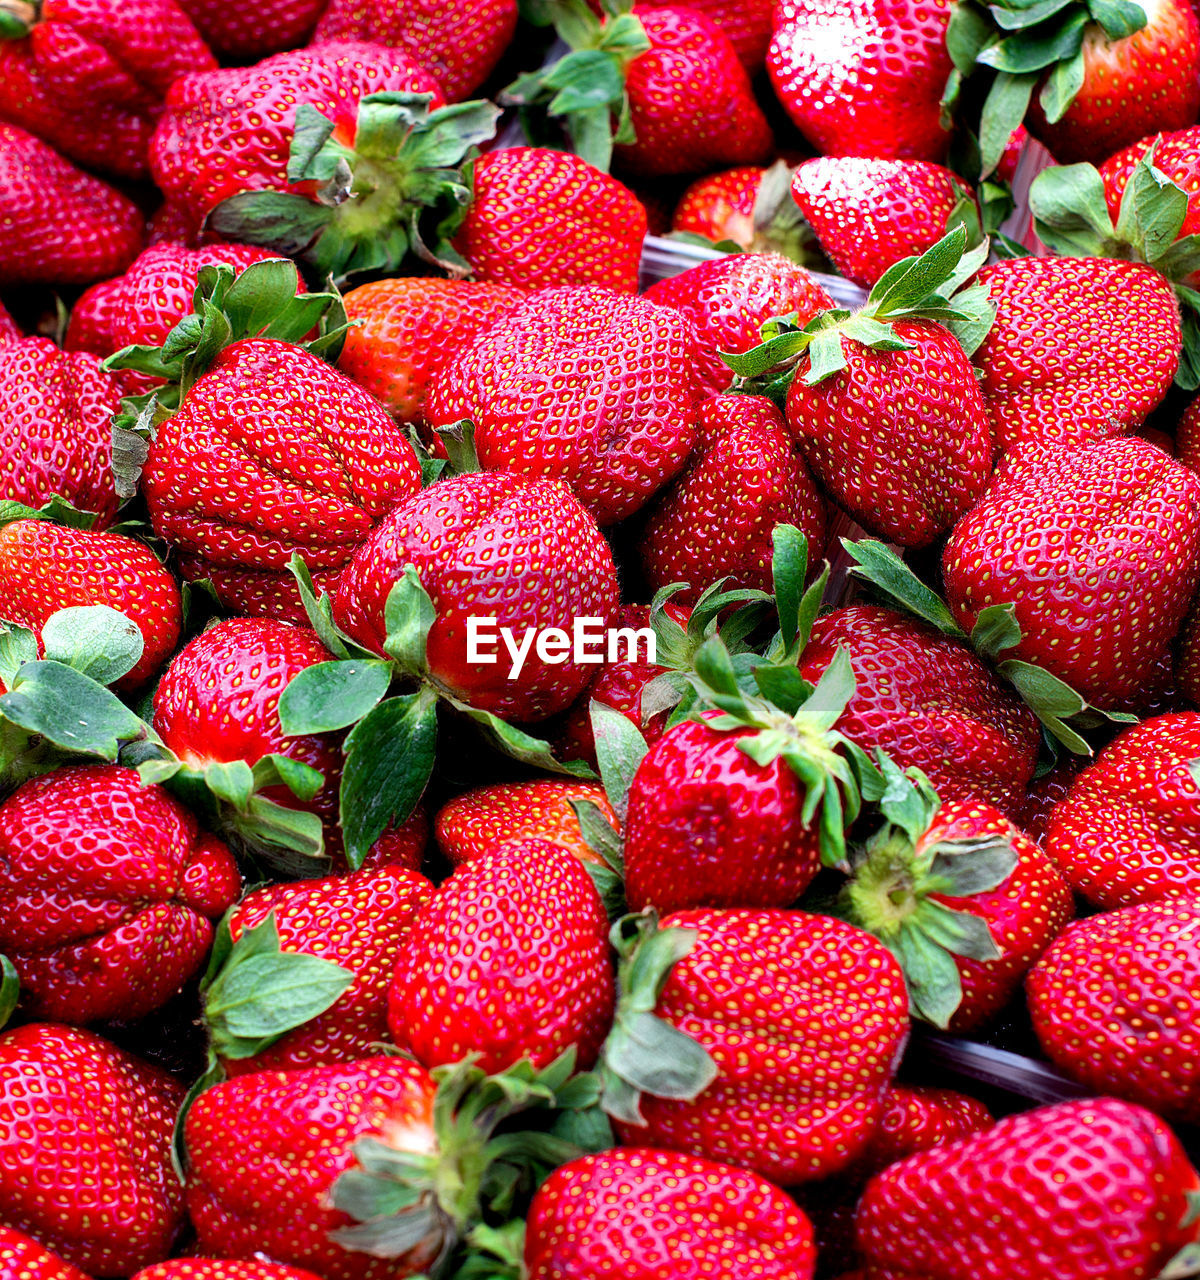 CLOSE UP OF STRAWBERRIES